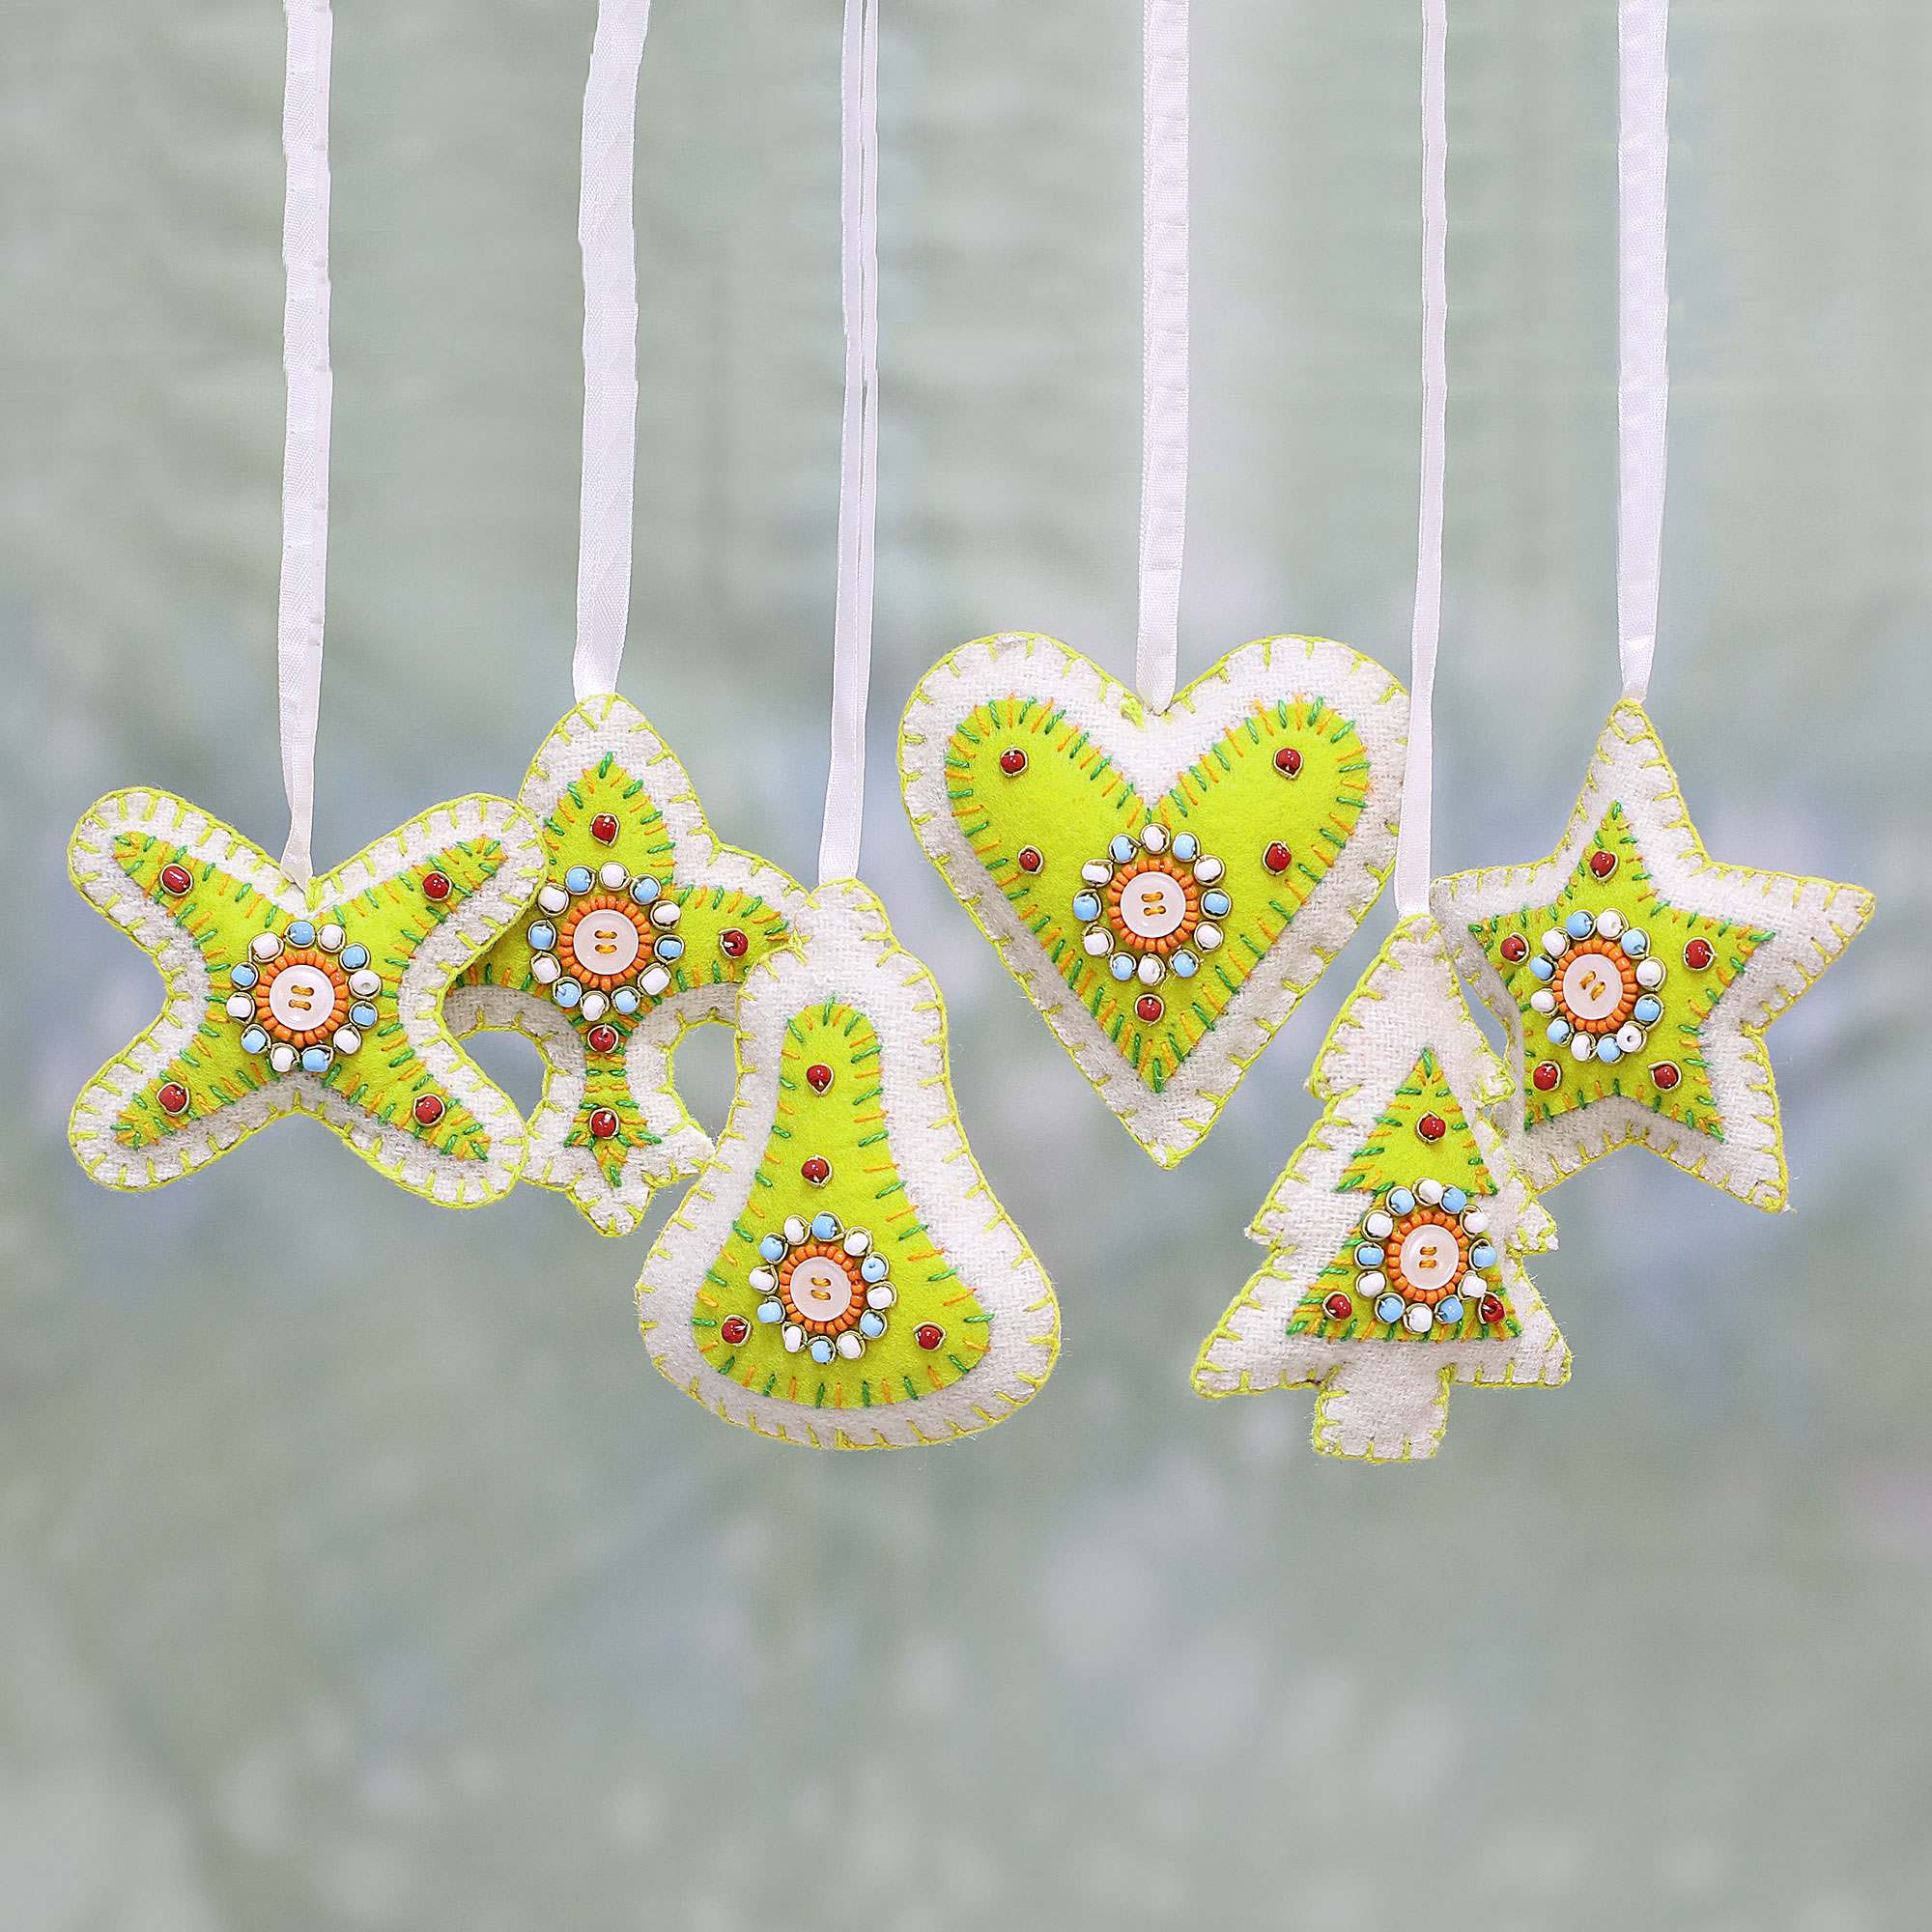 Set of Six Beaded Christmas Ornaments in Citron and White - Christmas ...